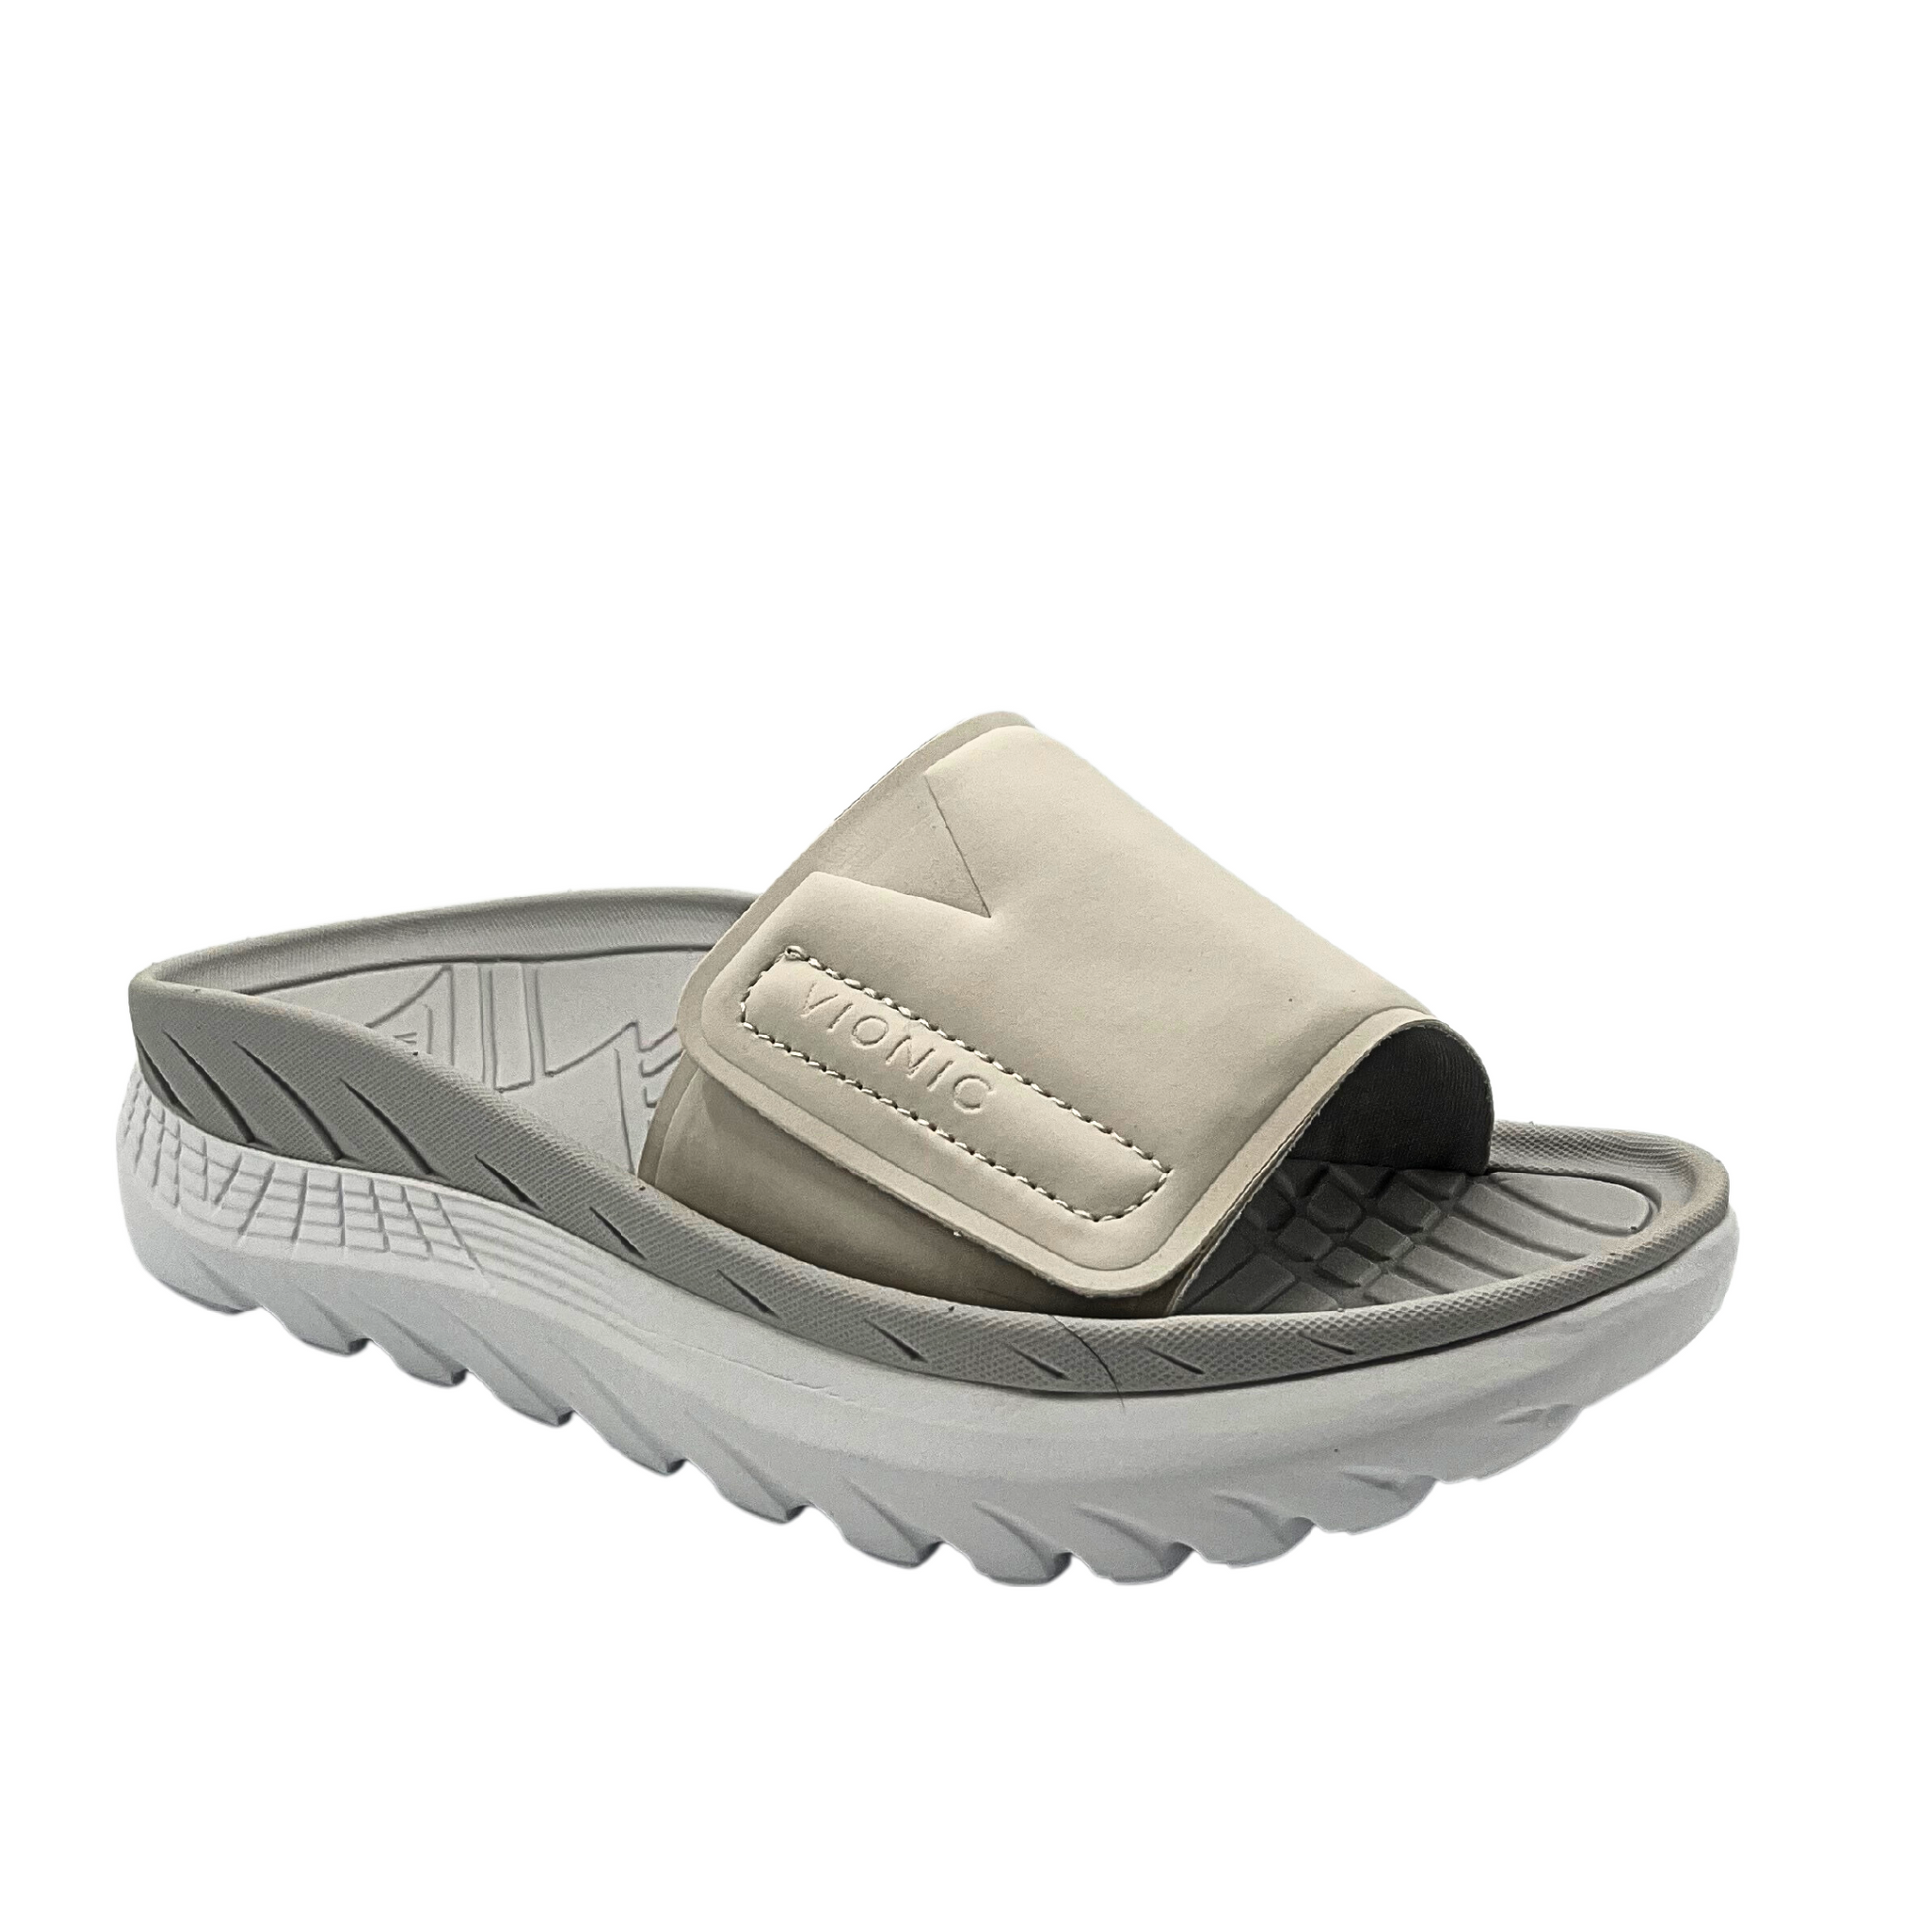 Angled side view of a water friendly beachslide with a contoured footbed and great arch support.  Shown in a taupe/grey color